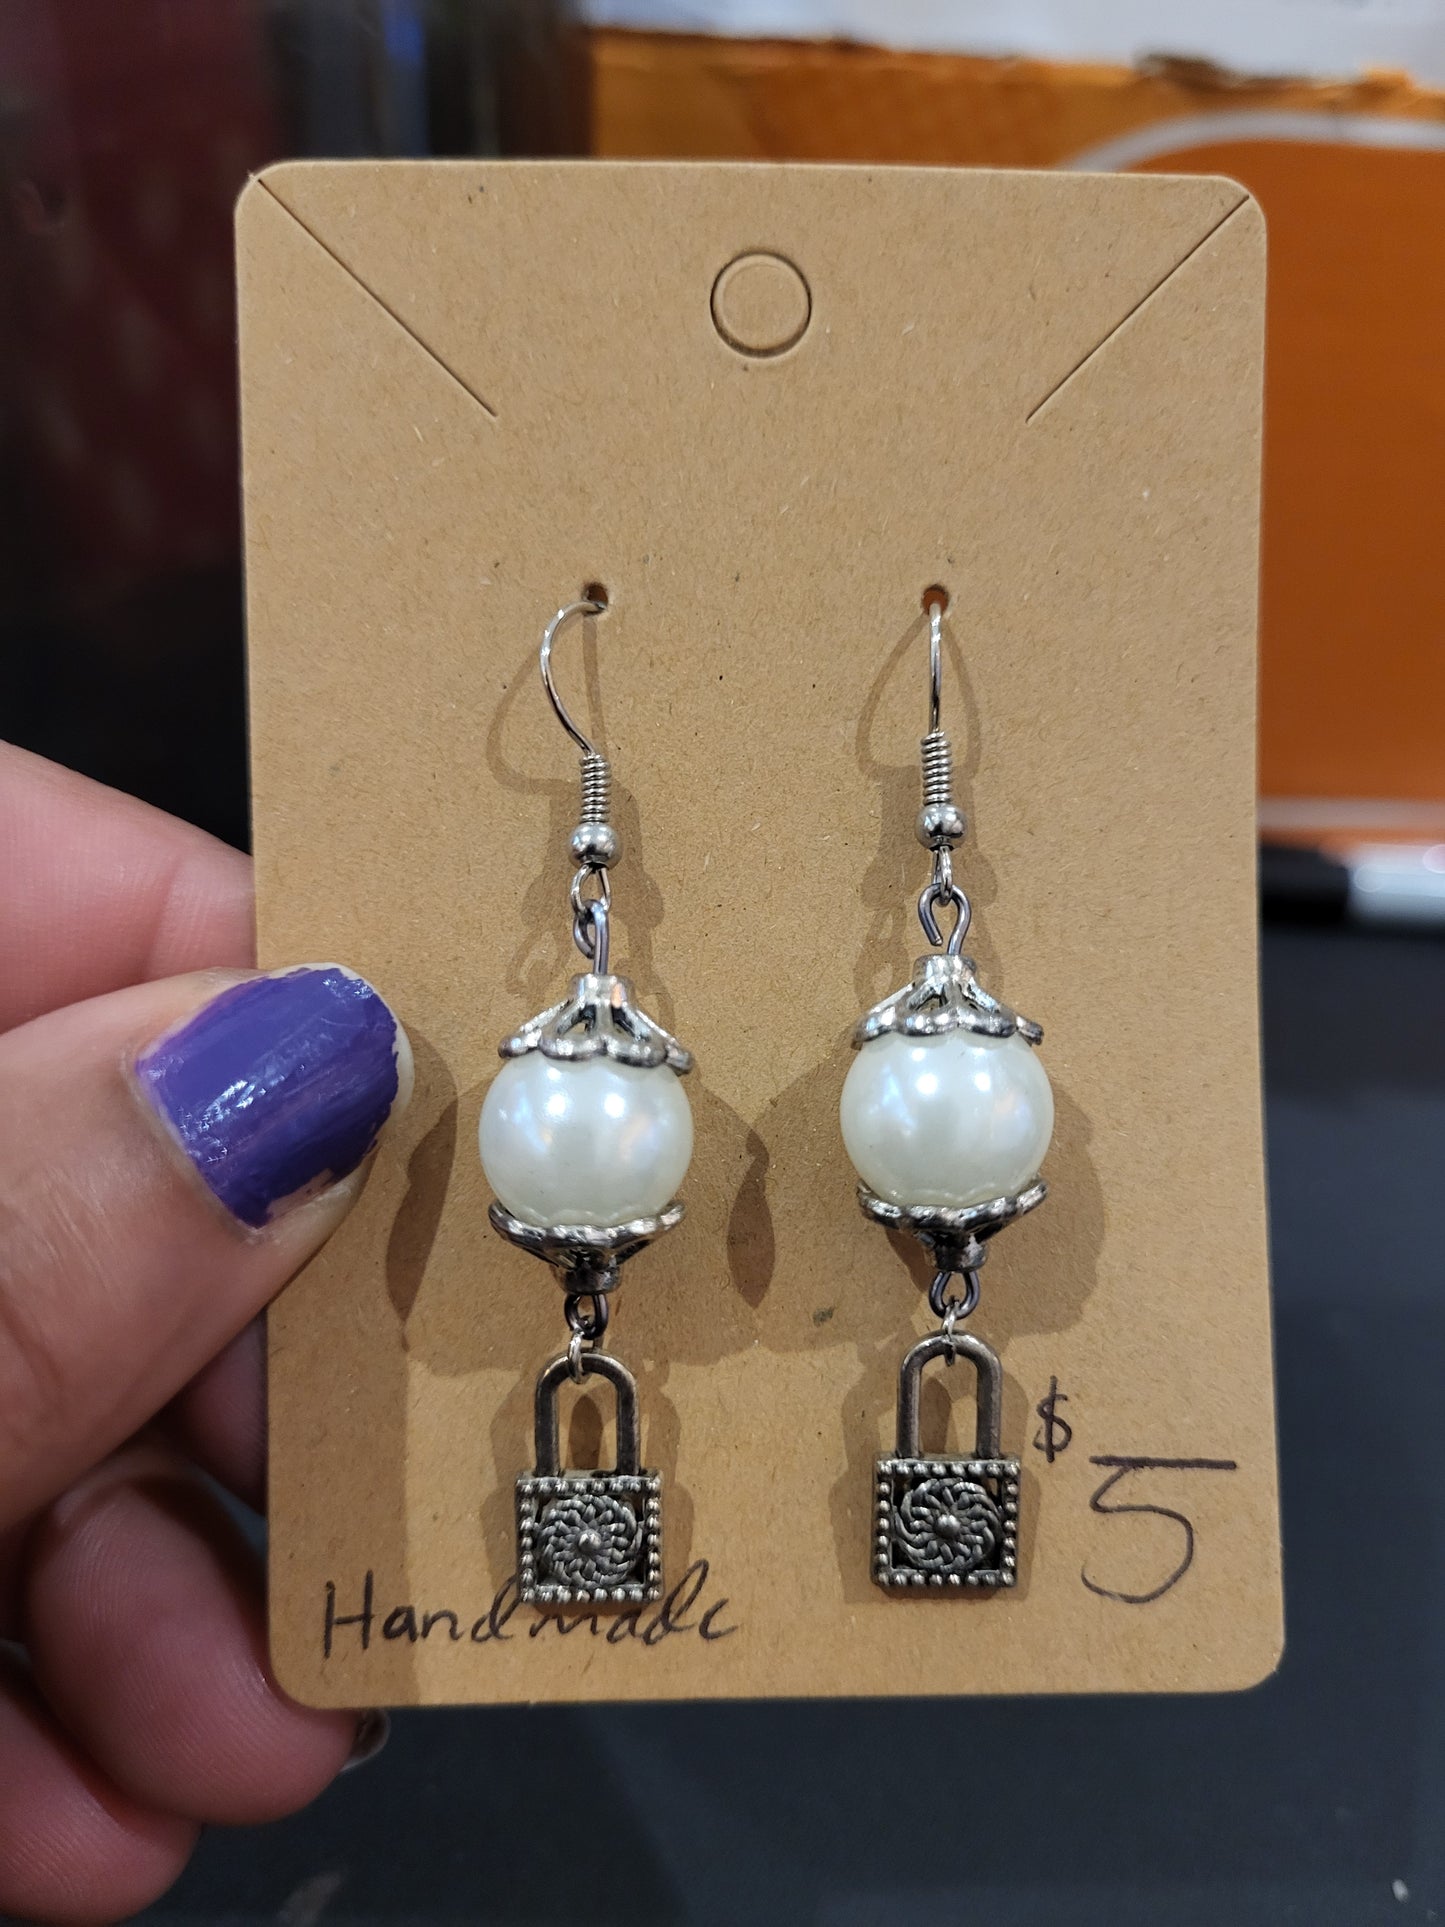 Handmade white and silver earrings with lock charm